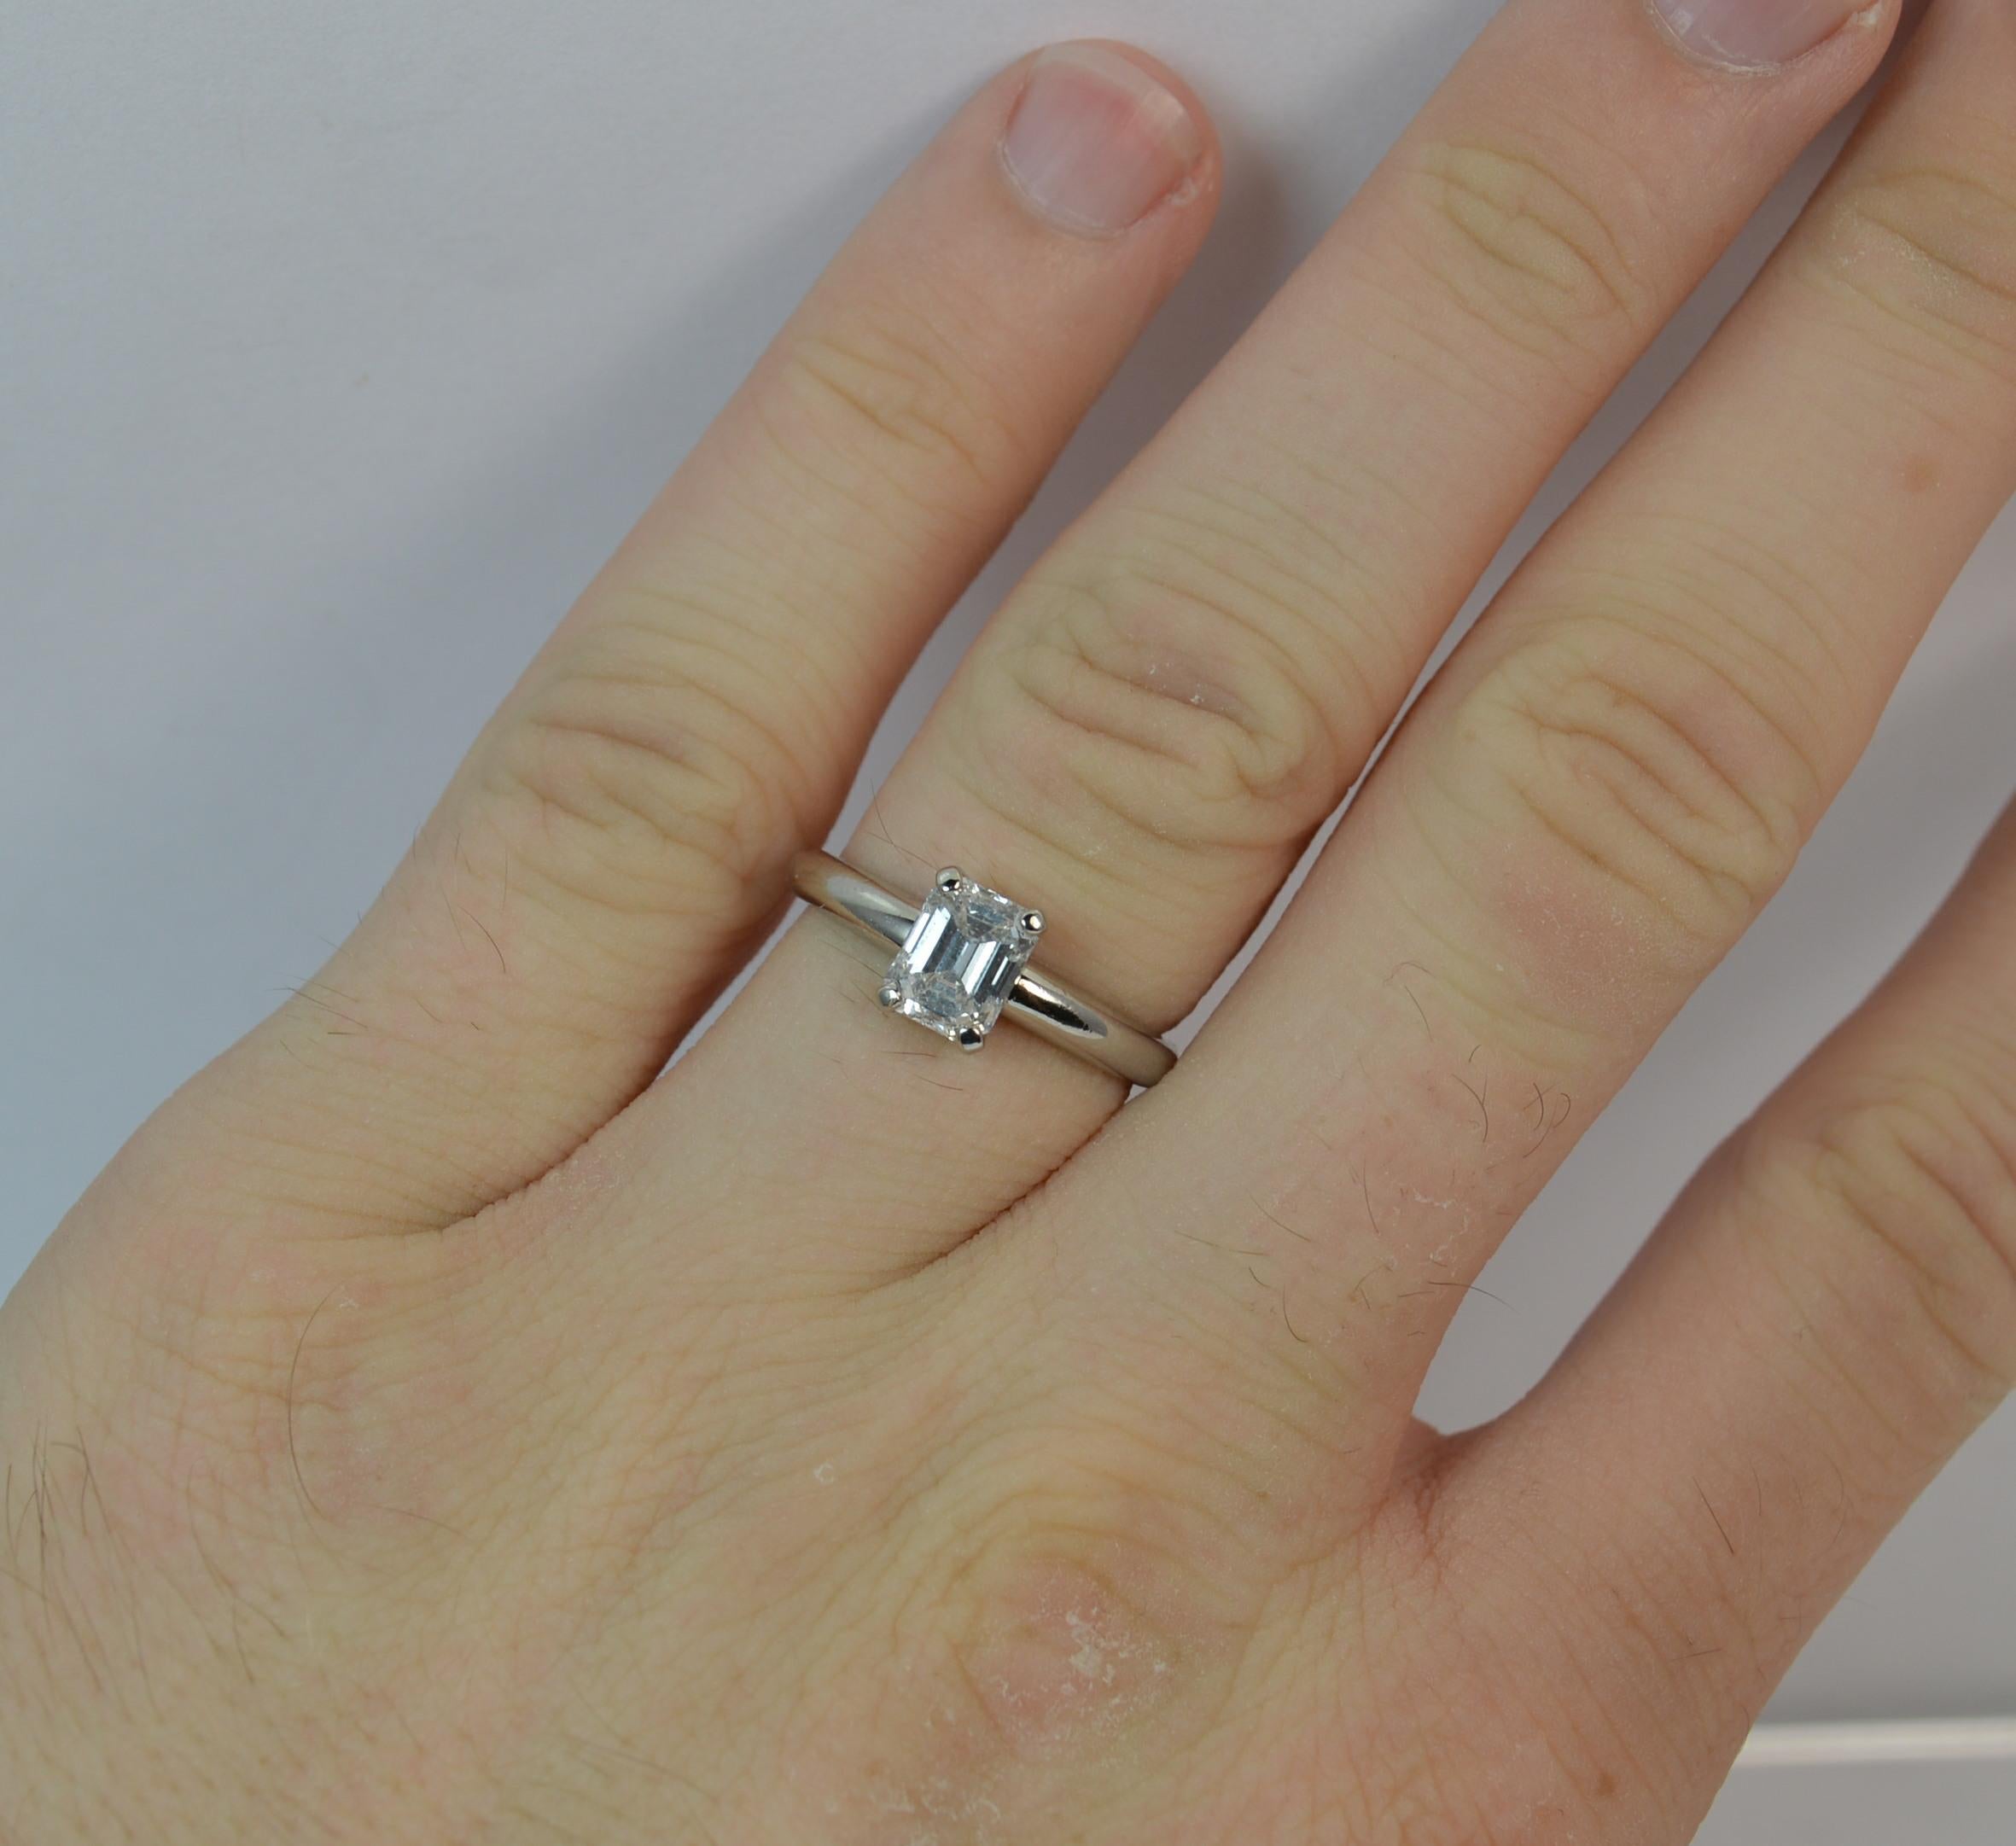 
A natural diamond and platinum ring.

Designed with a single emerald cut diamond in four claw setting.

The natural diamond has been weighed prior to setting as 1.01 carats.

5.05mm x 6.45mm approx stone. Bright and sparkly, eye clean.


Condition;